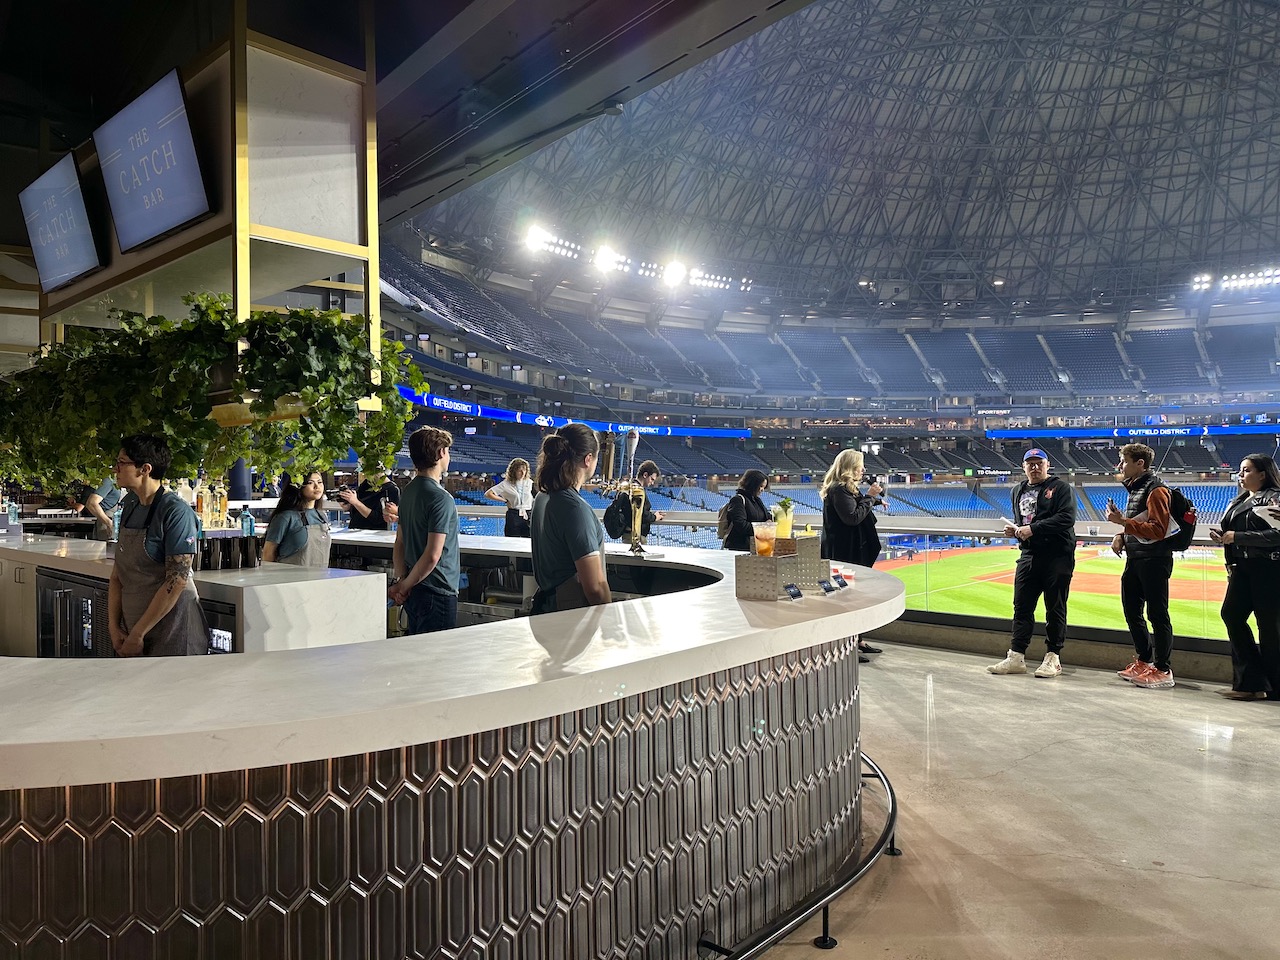 Blue Jays introduce new $20 'outfield district' tickets